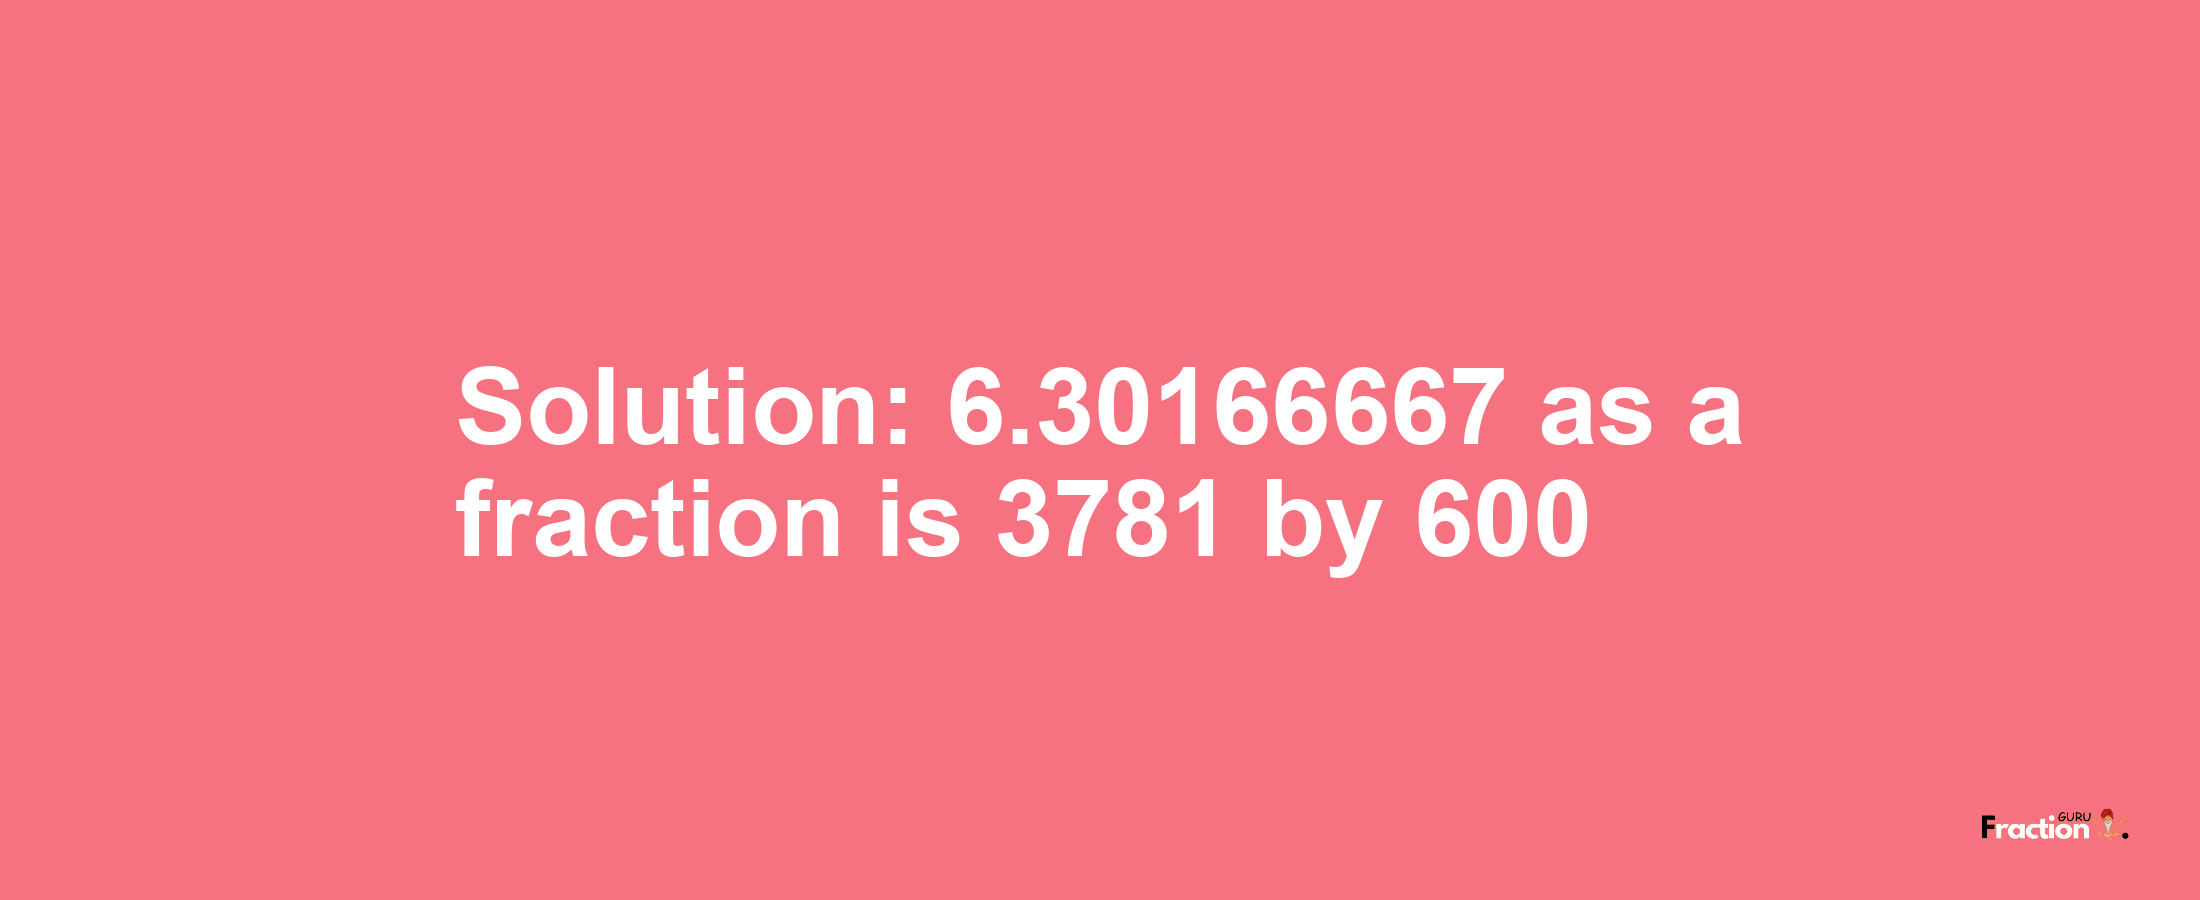 Solution:6.30166667 as a fraction is 3781/600